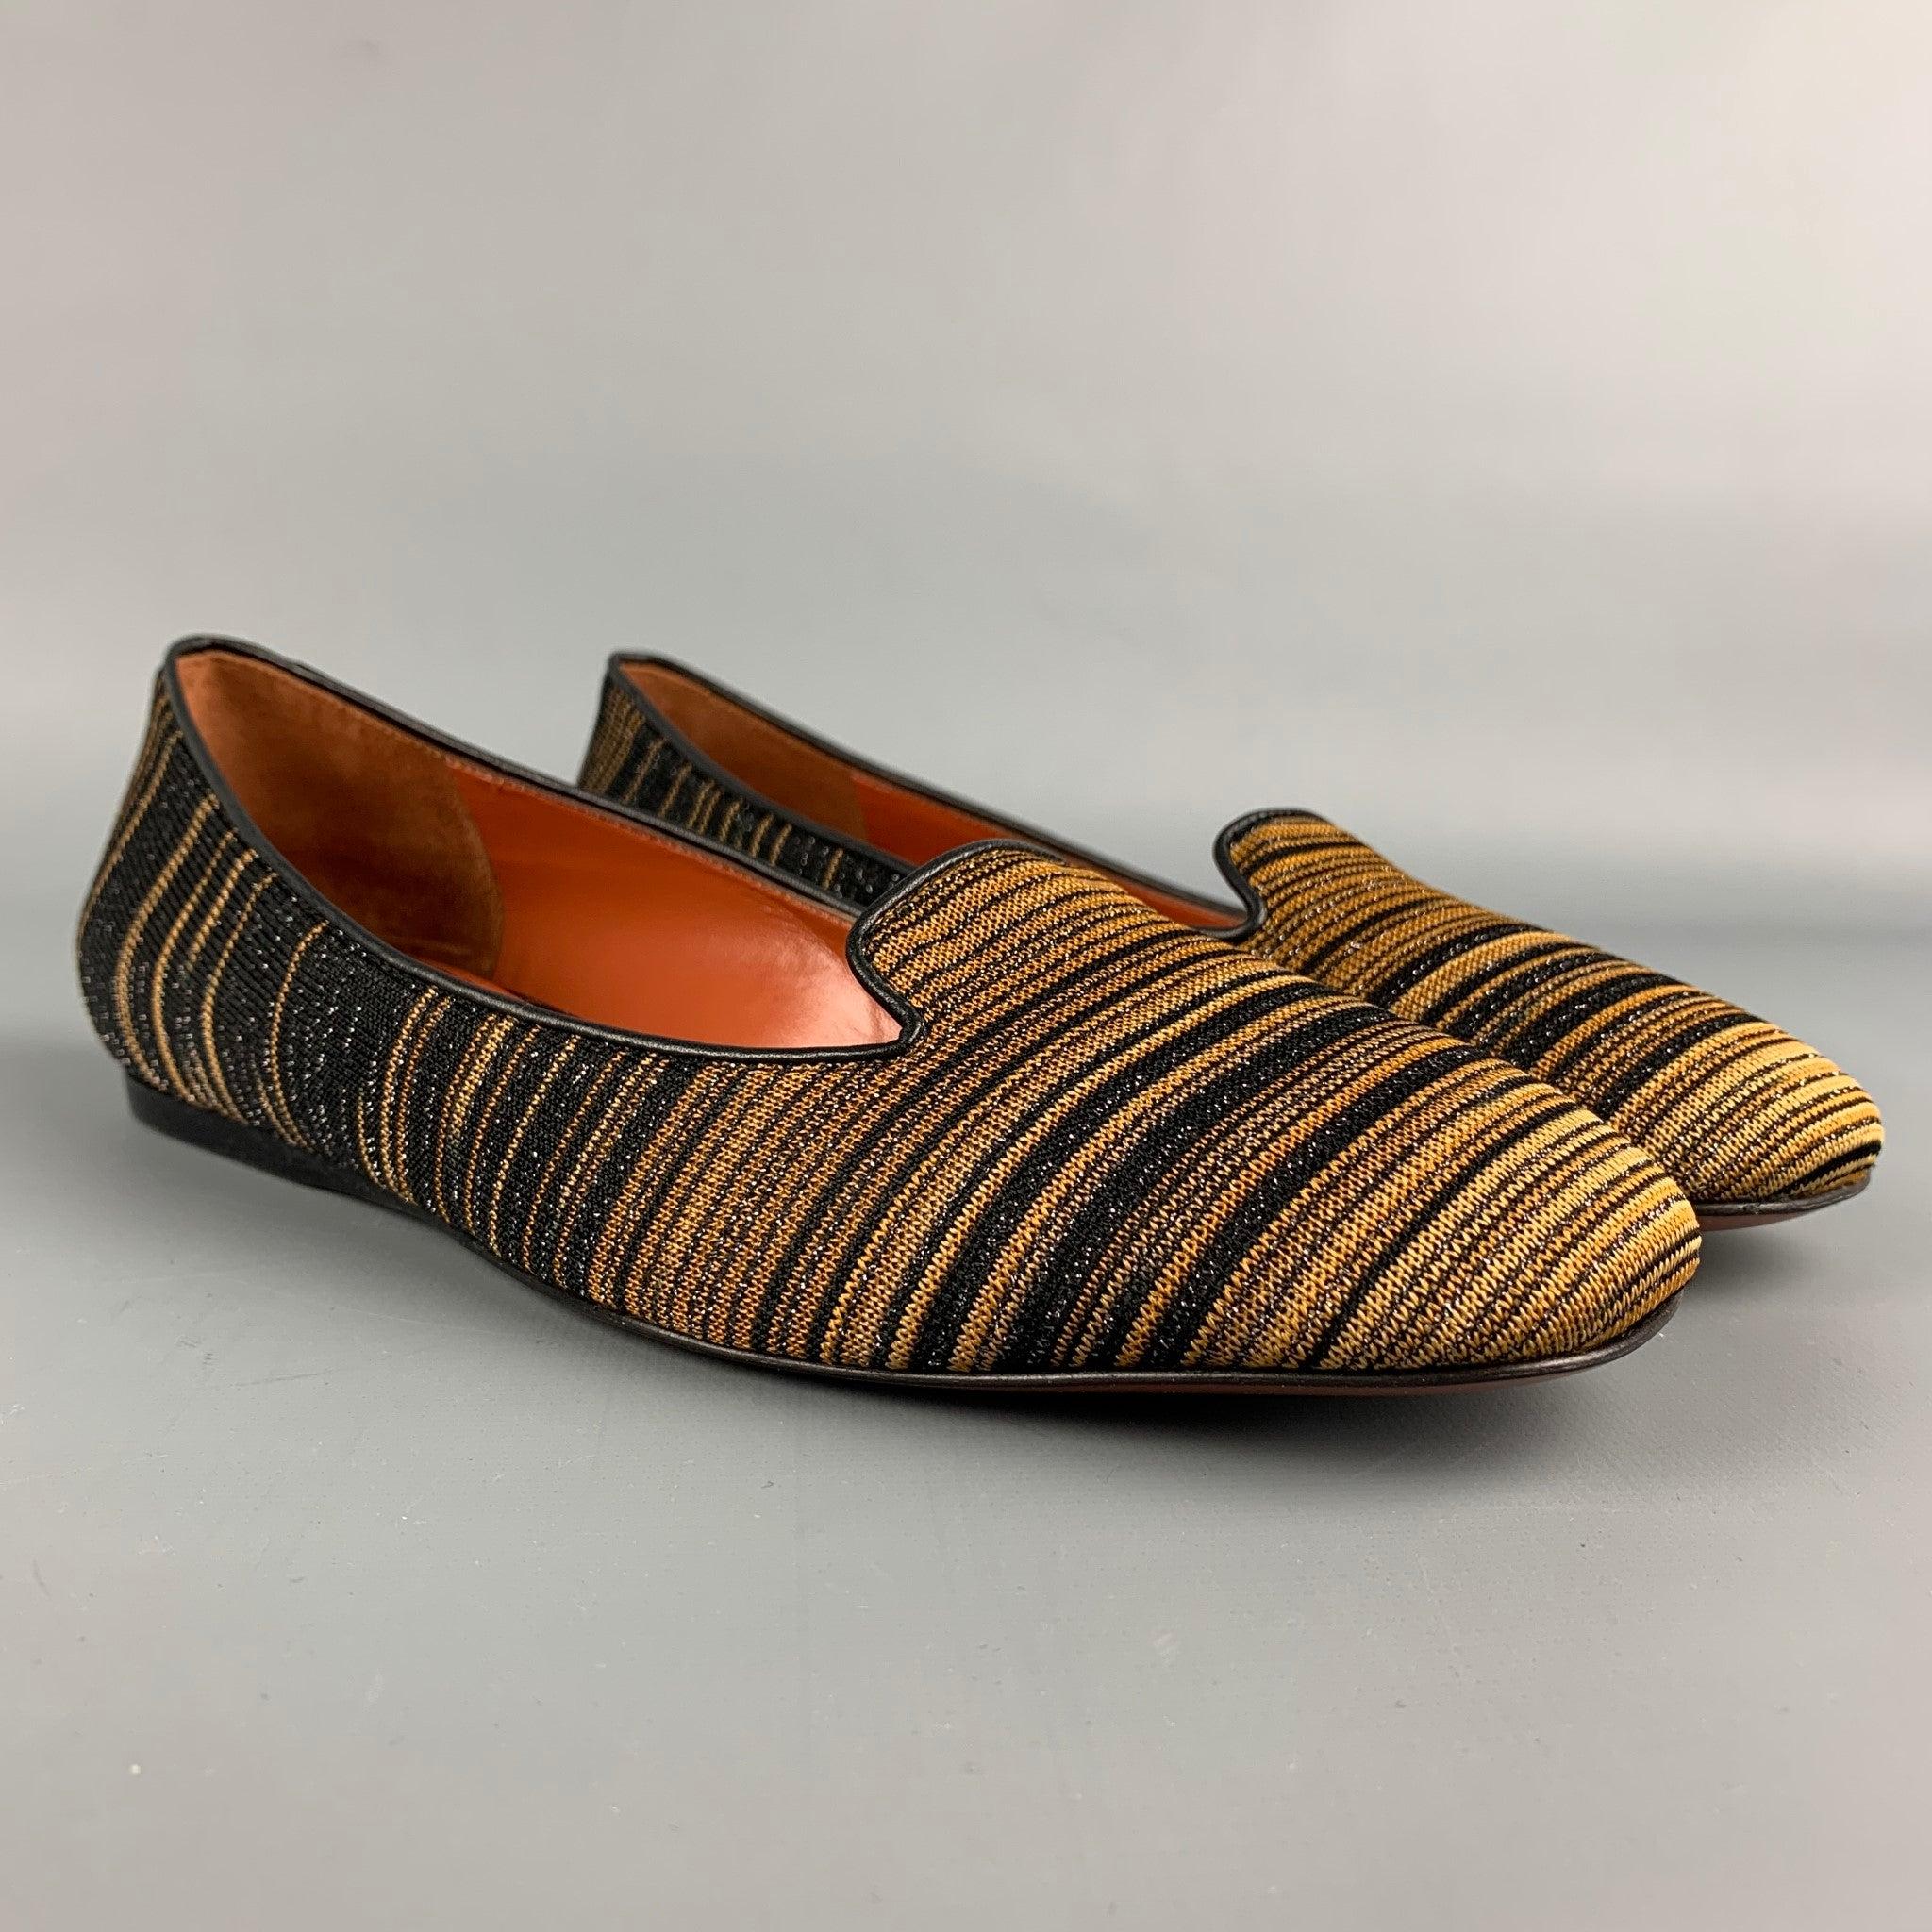 MISSONI flats comes in a black & gold stripe fabric featuring a slip on style. Comes with box. Made in Italy.
Excellent Pre-Owned Condition. 

Marked:   38Outsole: 3 inches  x 9.5 inches  
  
  
 
Reference: 111437
Category: Flats
More Details
   